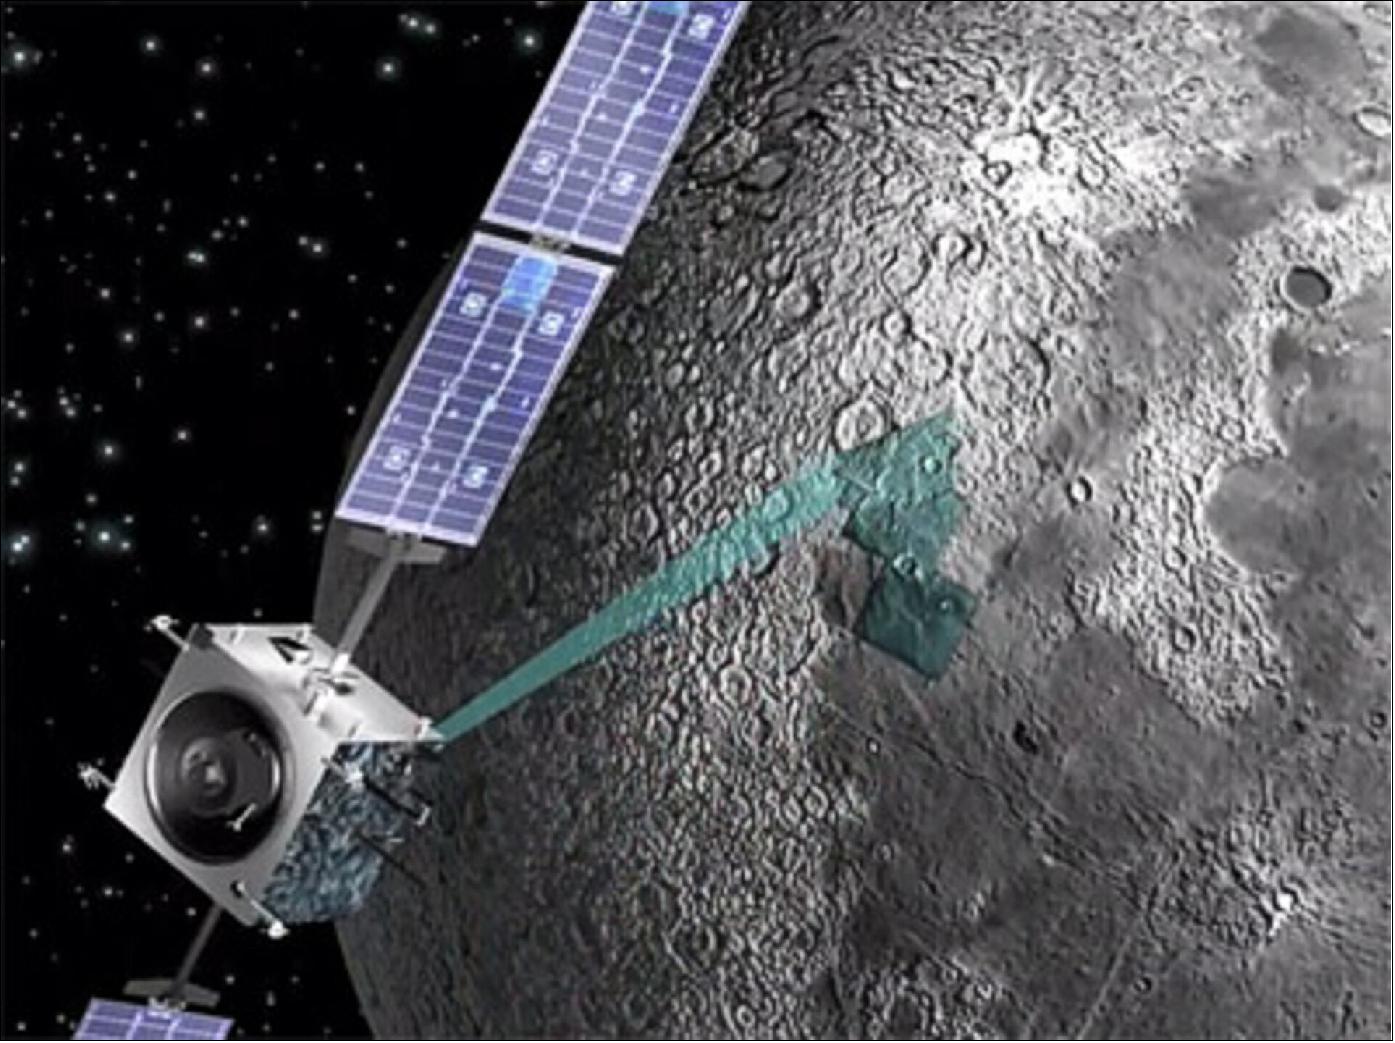 Figure 6: SMART-1 lunar observations. This animation shows ESA's SMART-1 spacecraft making scientifc observations in orbit around the Moon. SMART-1 was launched in September 2003 and concluded its mission through a small lunar impact on 3 September 2006 (image credit: ESA - C. Carreau)